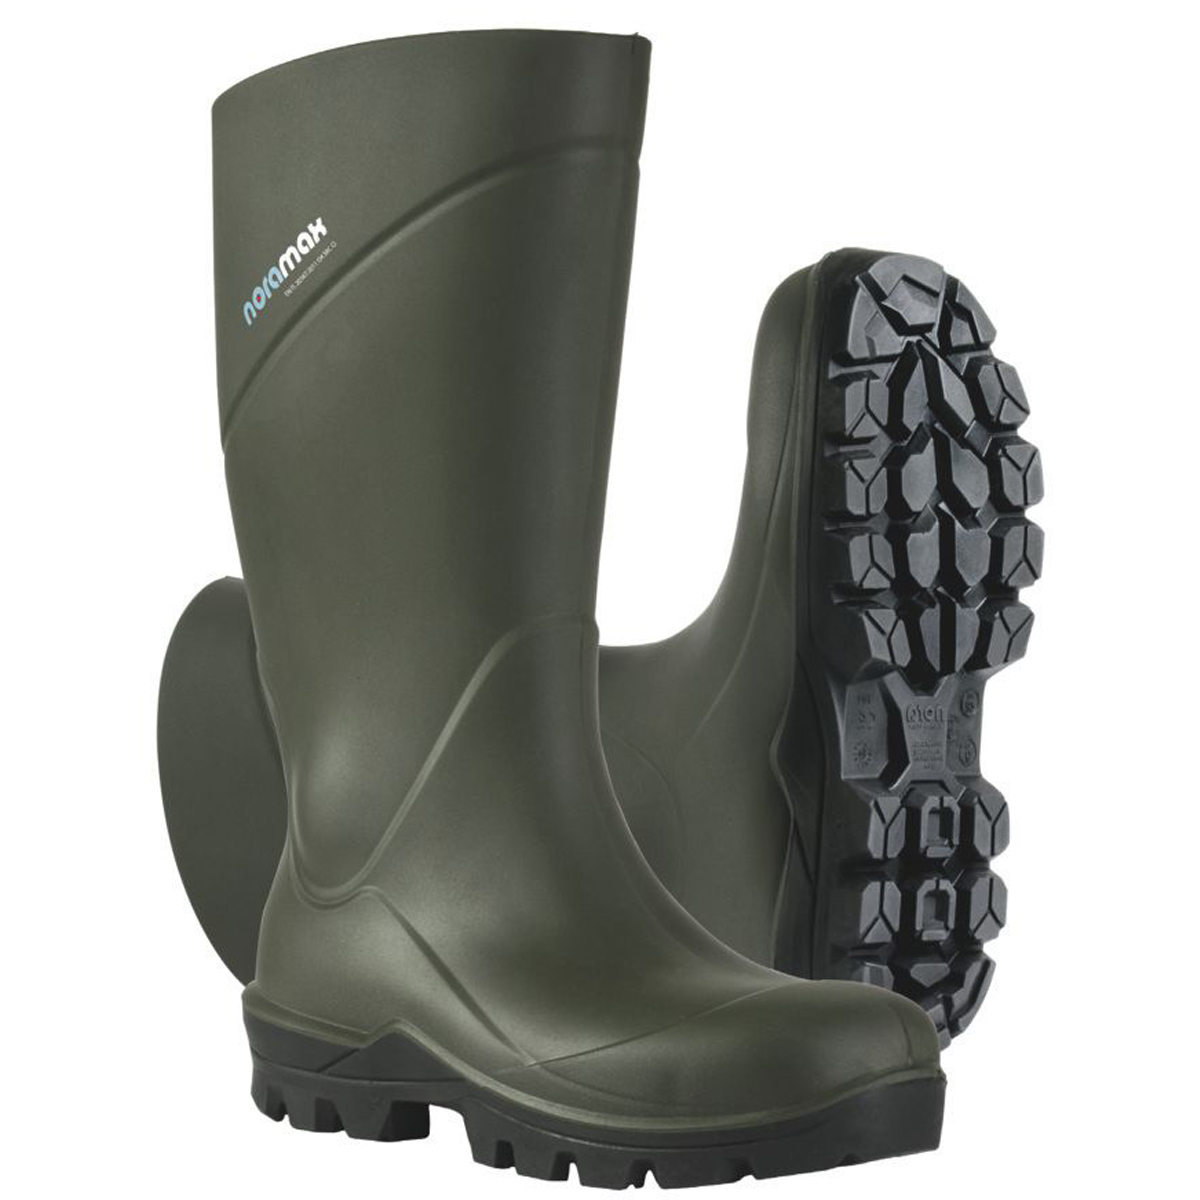 Noramax boots Non Safety 39